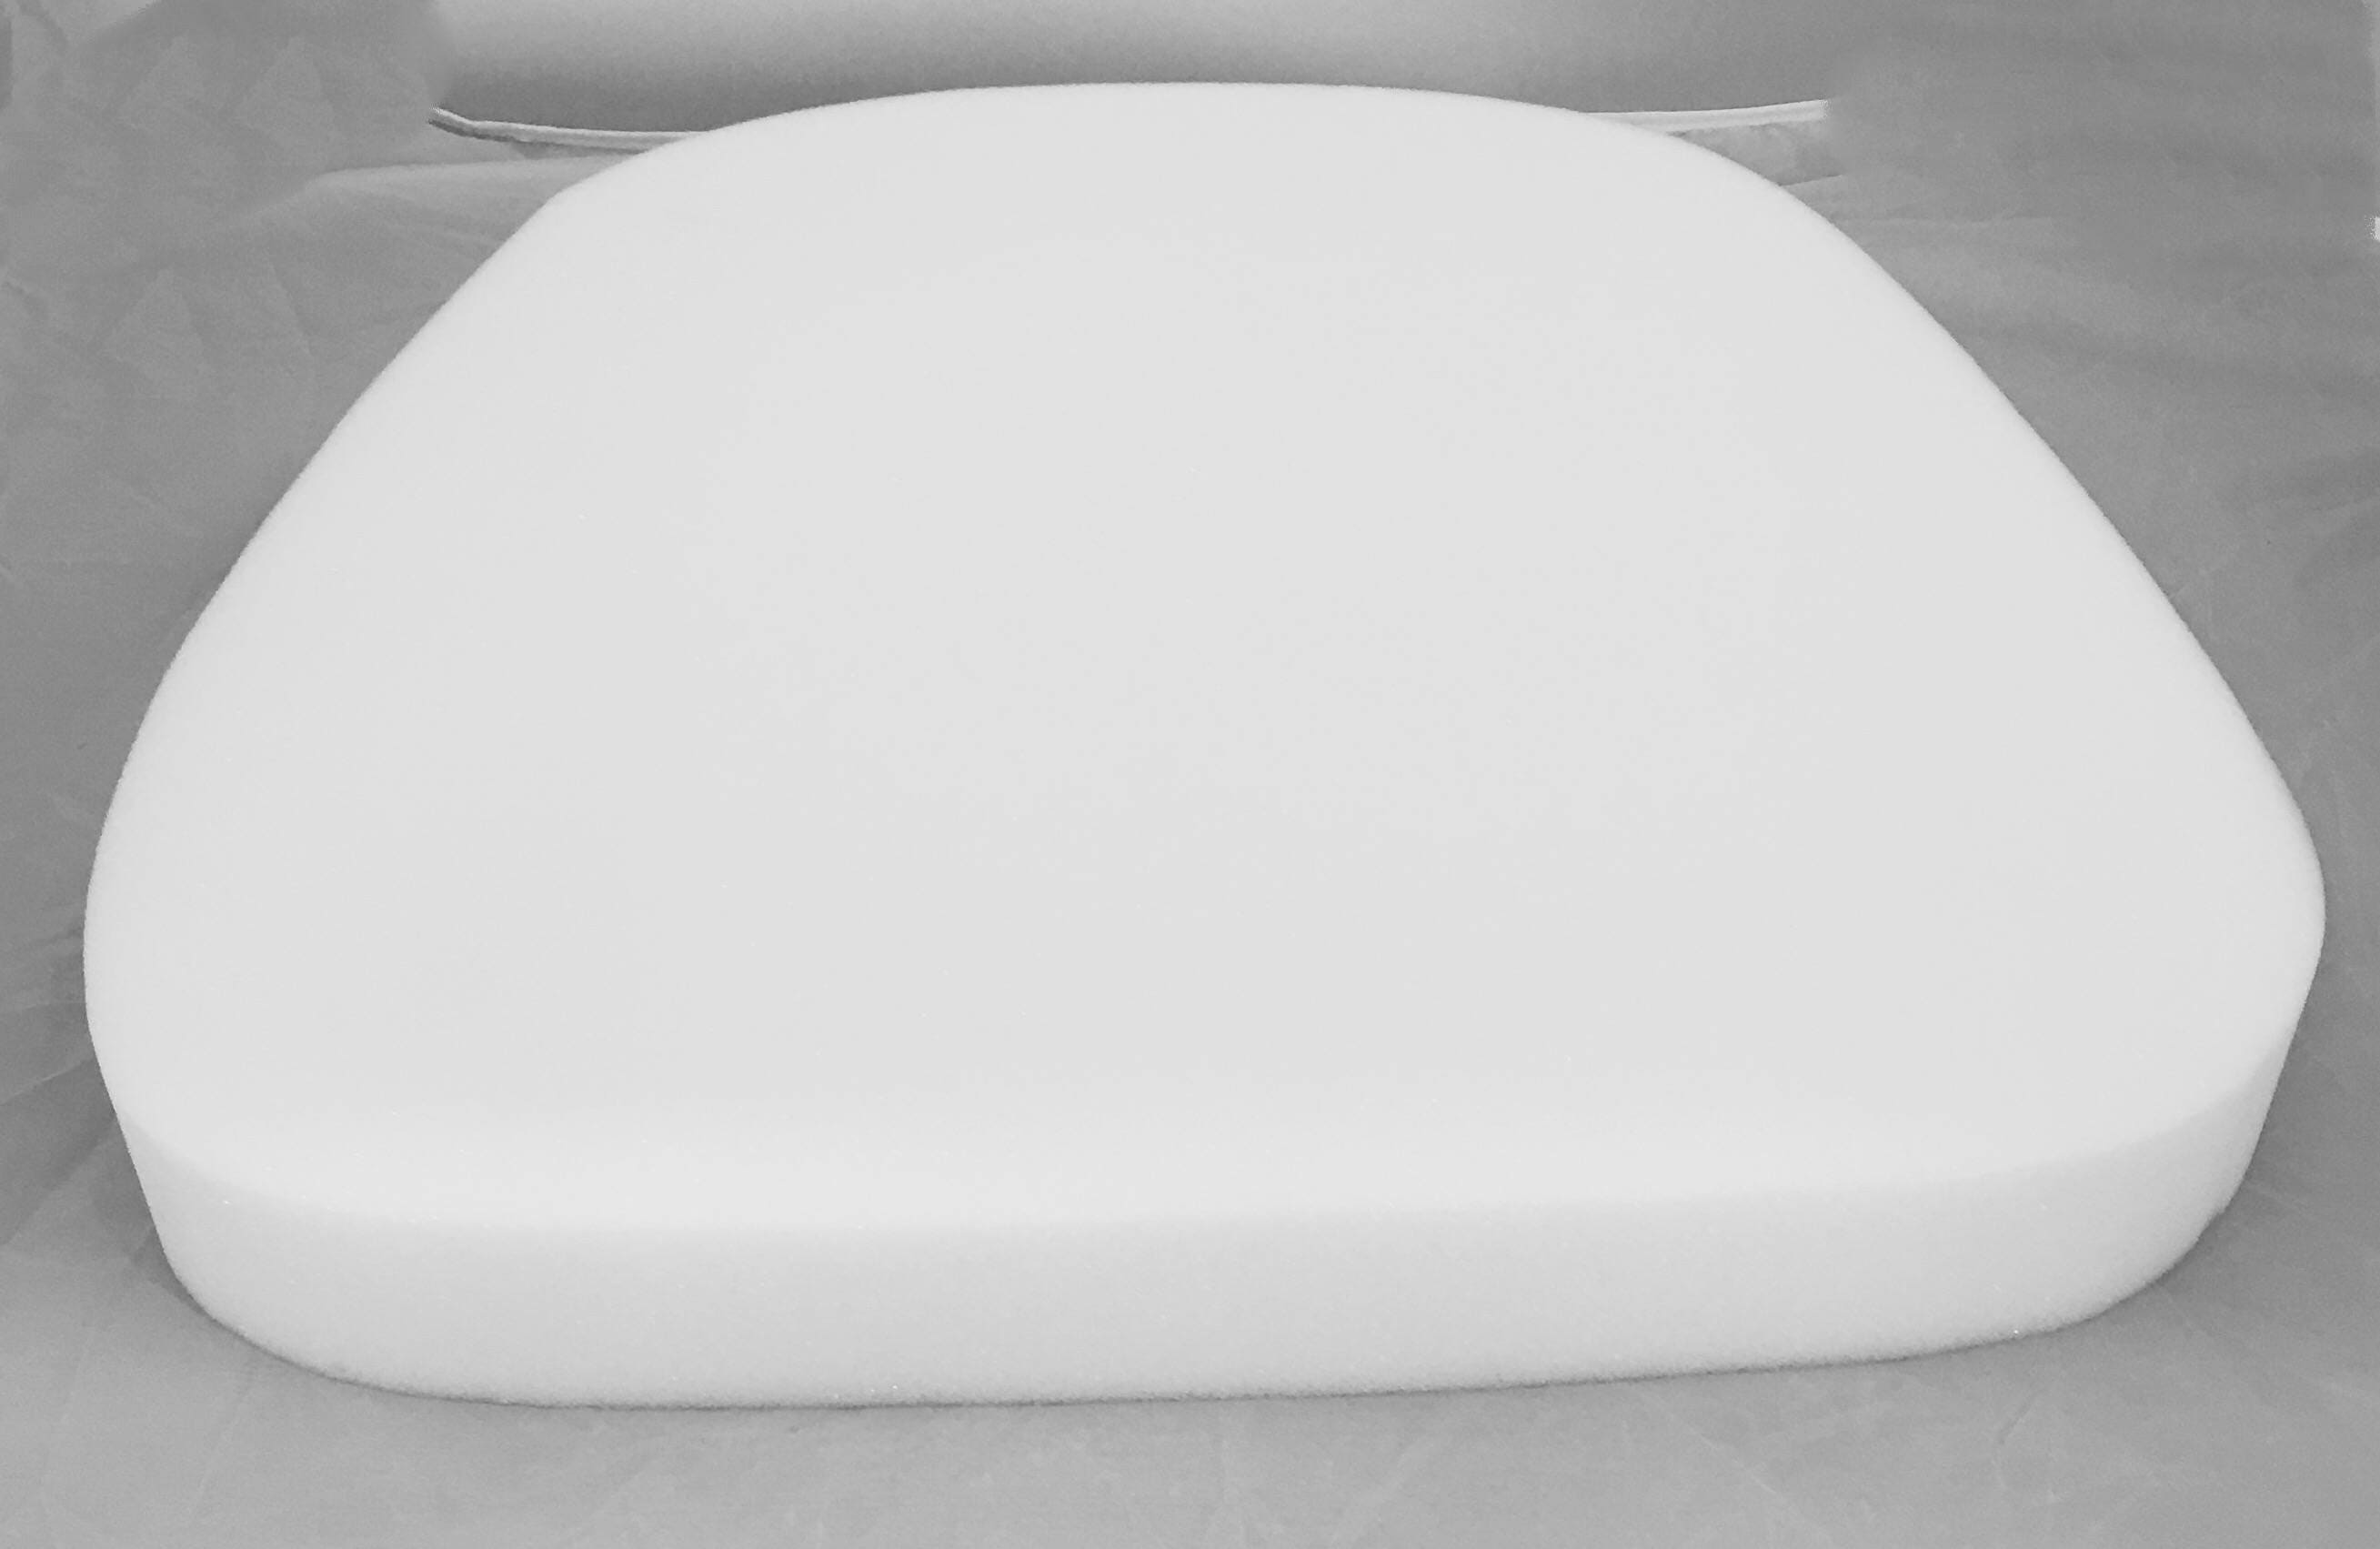 Upholstery chair Foam cushion 2" thick 16"x 16" High Density from